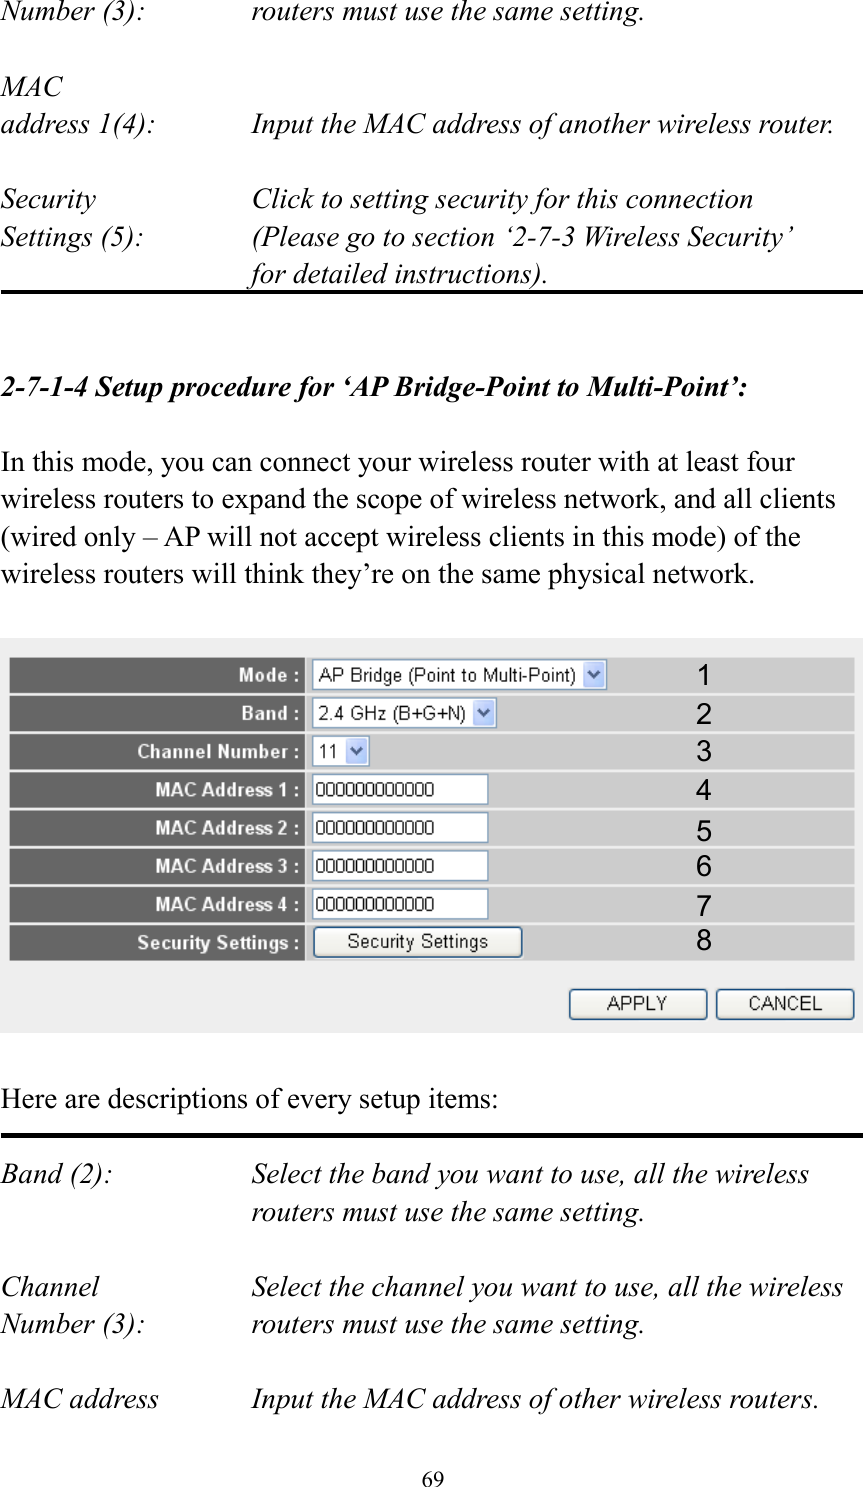 69 Number (3):  routers must use the same setting.  MAC address 1(4):  Input the MAC address of another wireless router.  Security    Click to setting security for this connection Settings (5):  (Please go to section ‘2-7-3 Wireless Security’   for detailed instructions).   2-7-1-4 Setup procedure for ‘AP Bridge-Point to Multi-Point’:  In this mode, you can connect your wireless router with at least four wireless routers to expand the scope of wireless network, and all clients (wired only – AP will not accept wireless clients in this mode) of the wireless routers will think they’re on the same physical network.    Here are descriptions of every setup items:  Band (2):  Select the band you want to use, all the wireless routers must use the same setting.  Channel  Select the channel you want to use, all the wireless Number (3):  routers must use the same setting.  MAC address    Input the MAC address of other wireless routers. 1 2 3 4 5 6 7 8 